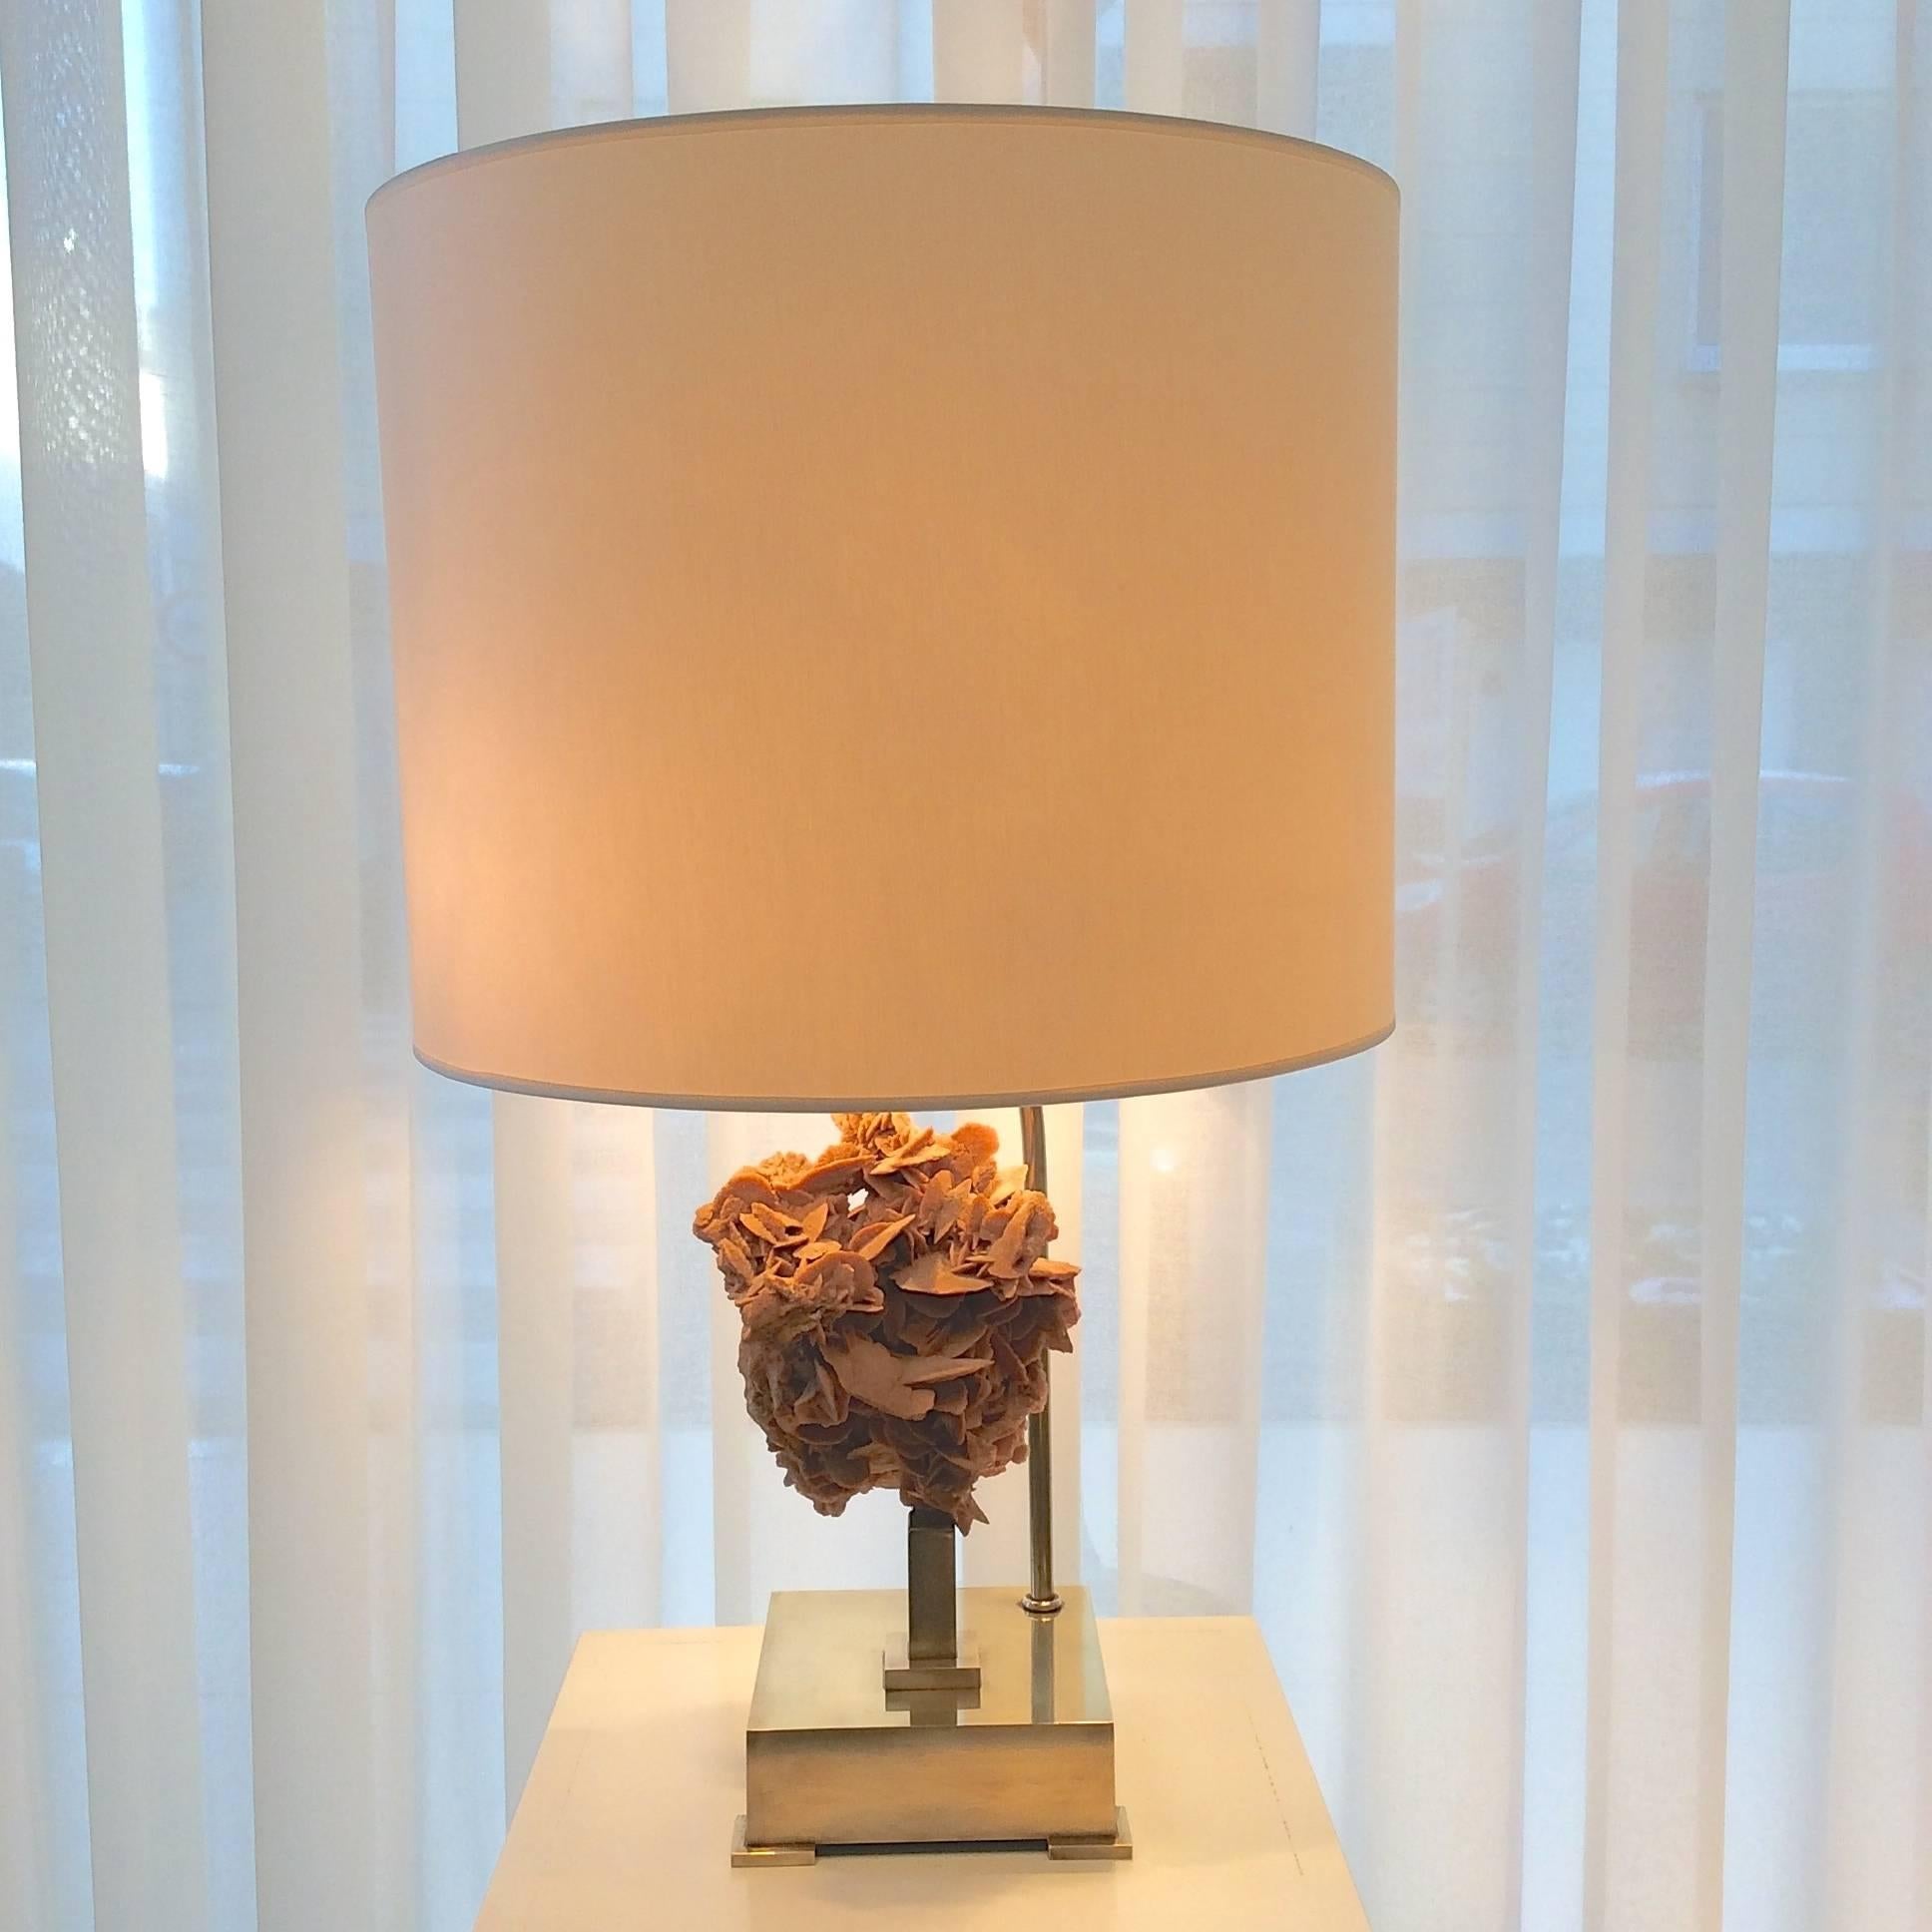 Table lamp, desert rose on brass structure.
Attributed to Willy Daro, circa 1970, Belgium.
Good condition.
New ivory fabric shade.
Two bulbs of 60 Watts.
Measures: H 57 cm, base: 14 x 14 cm, shade diameter: 35 cm.
  